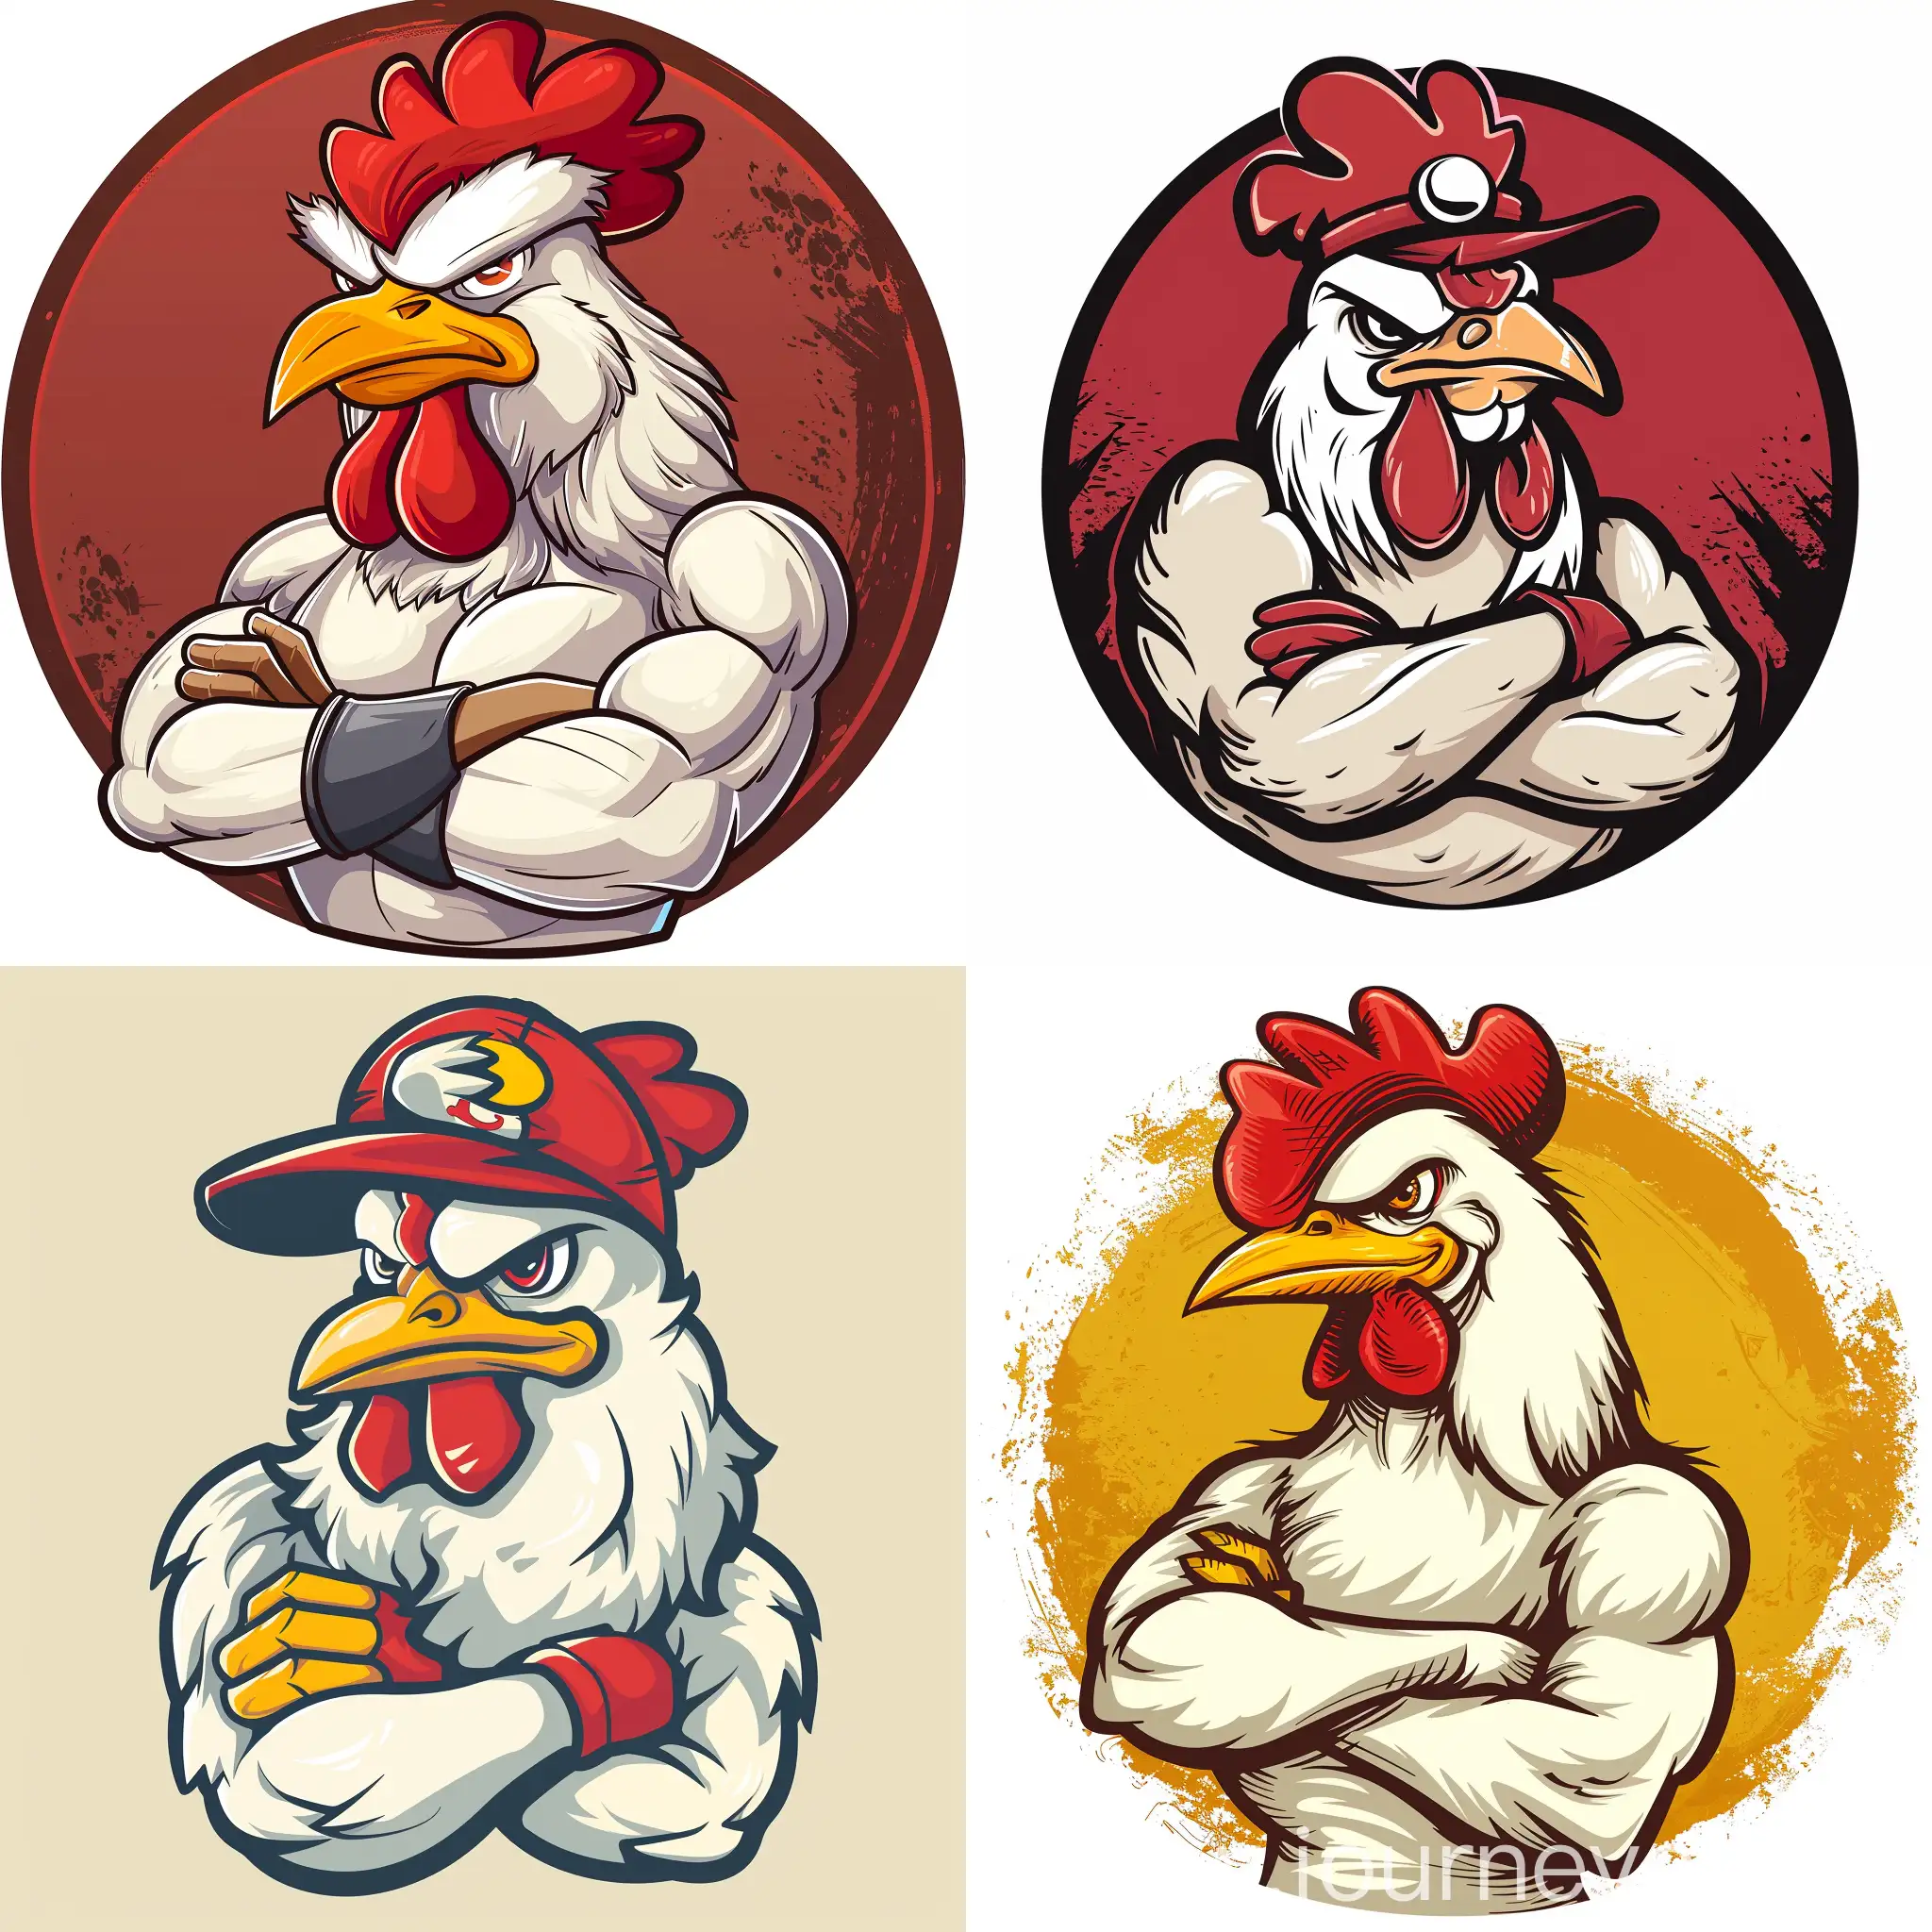 Anthropomorphic-Angry-Rooster-Cartoon-with-Crossed-Arms-and-Red-Hat